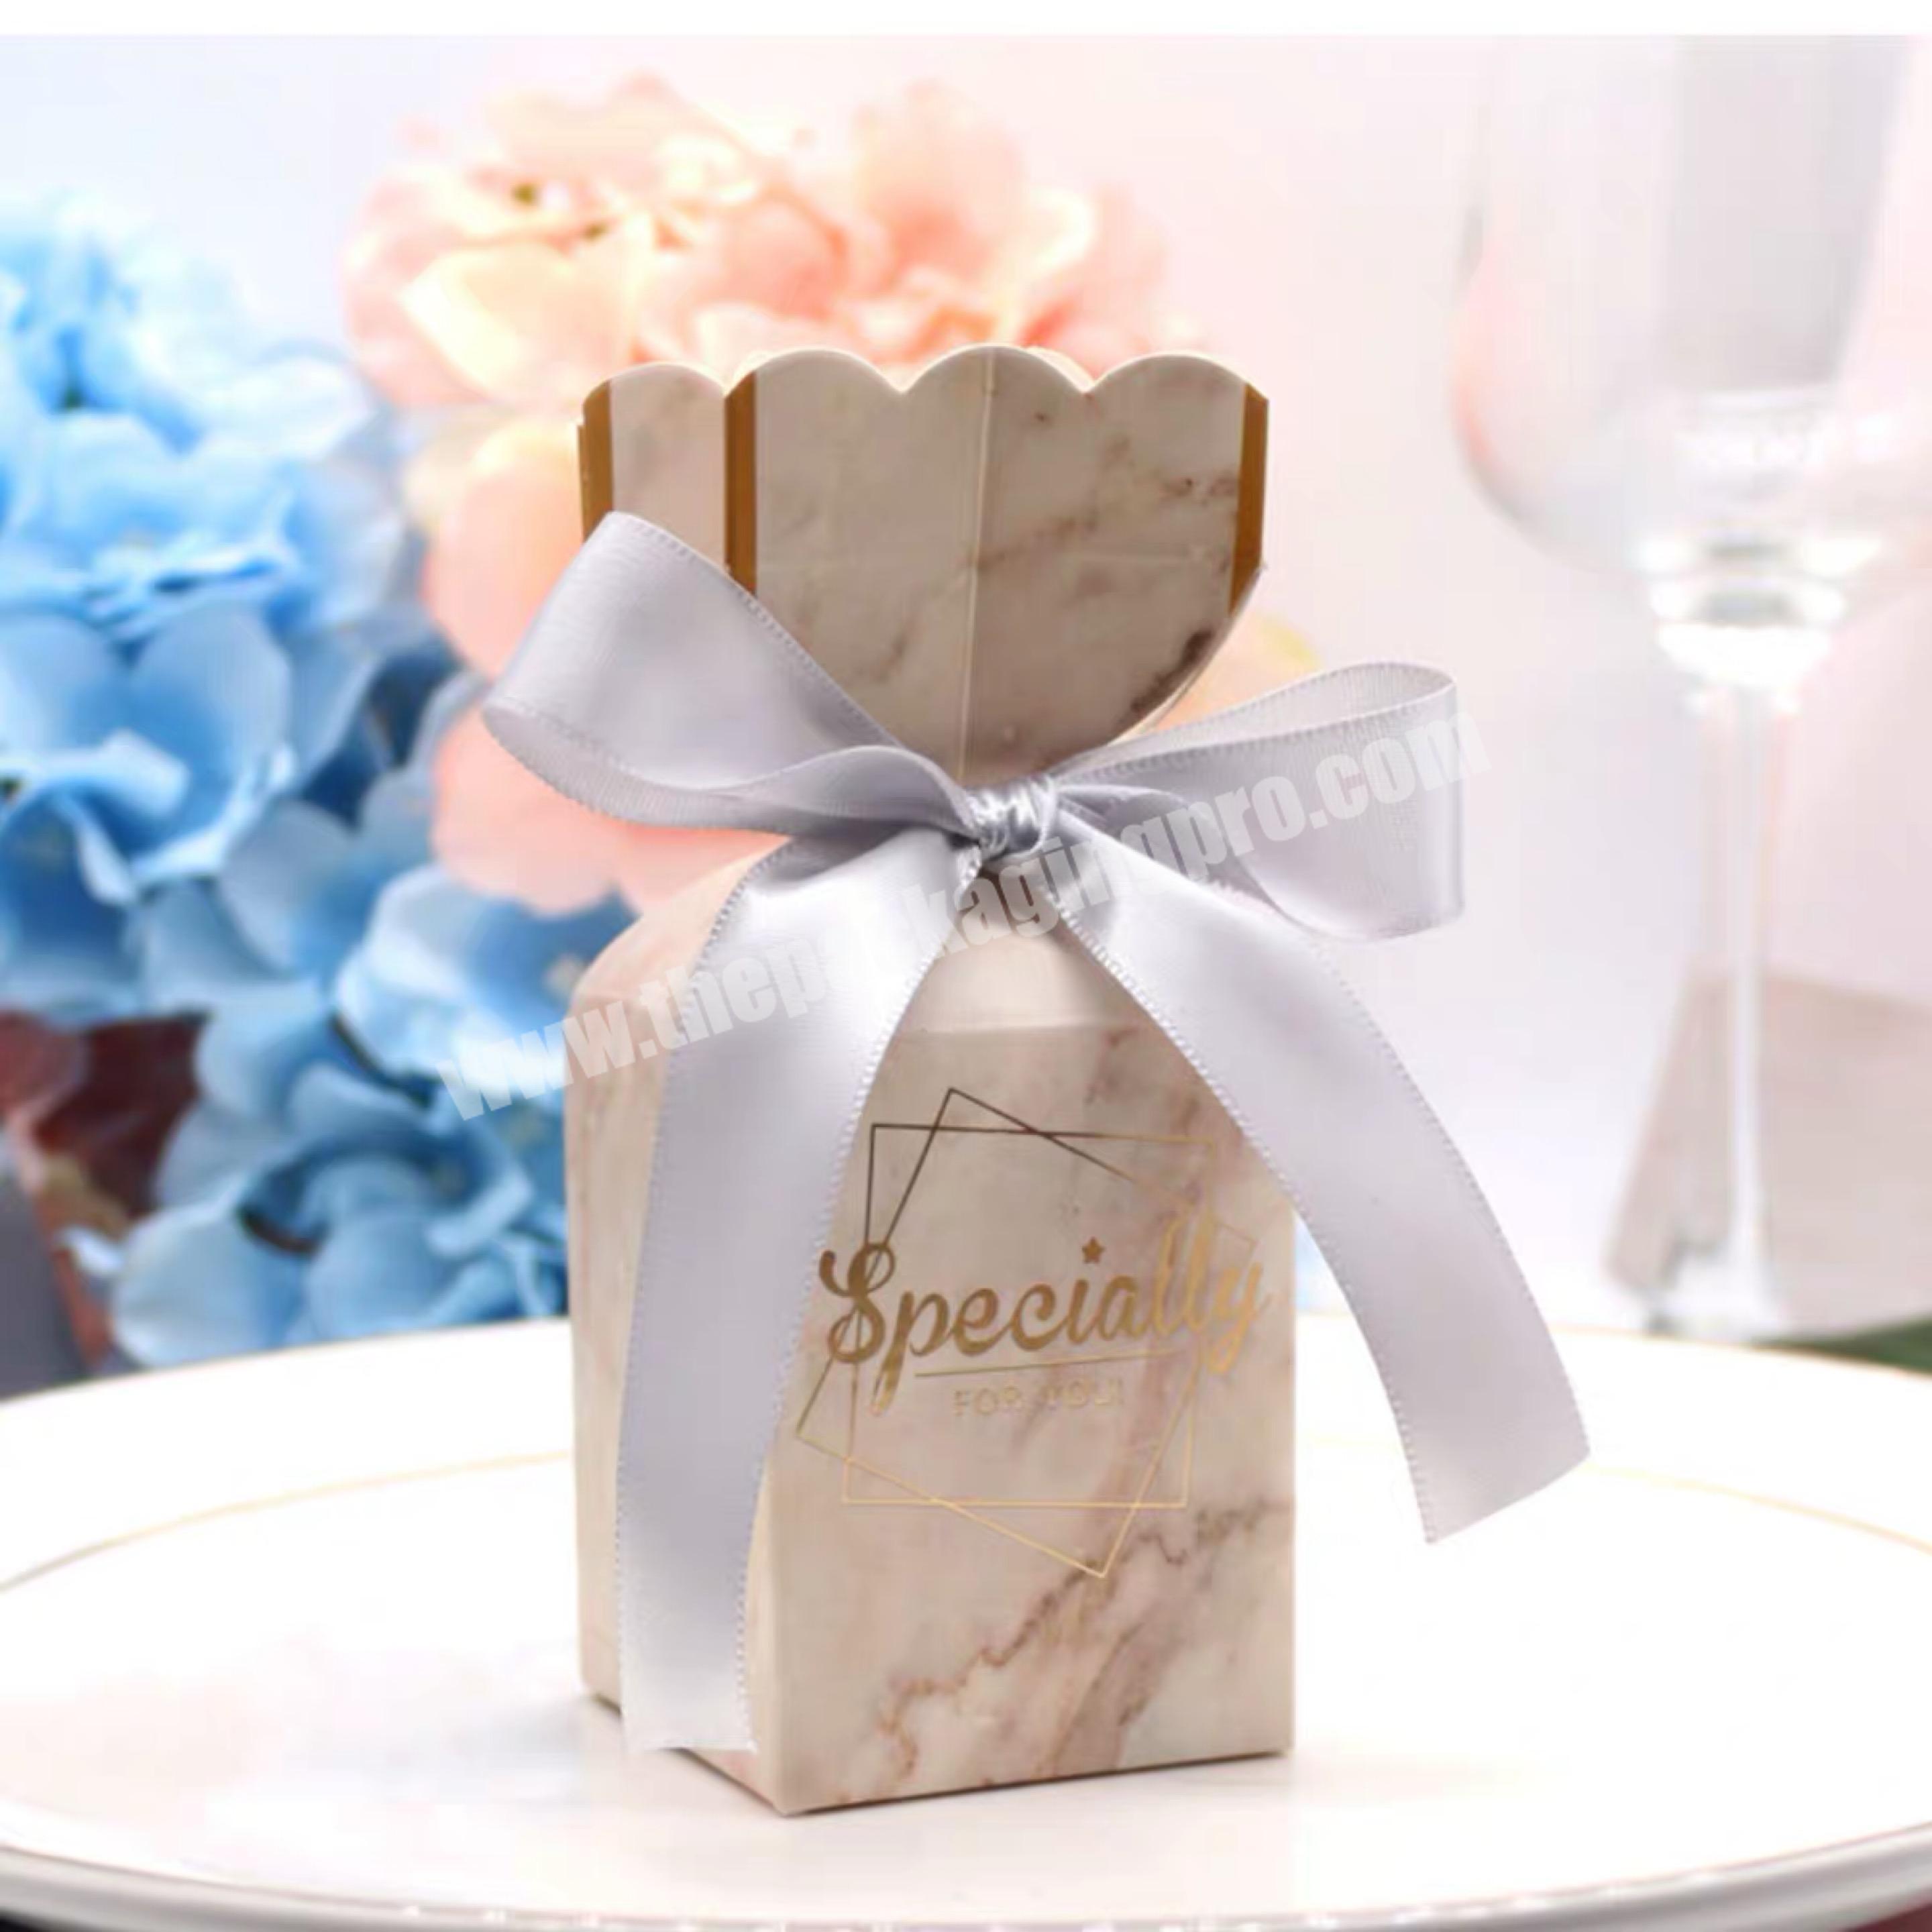 design small gift door candy packaging box for wedding favors